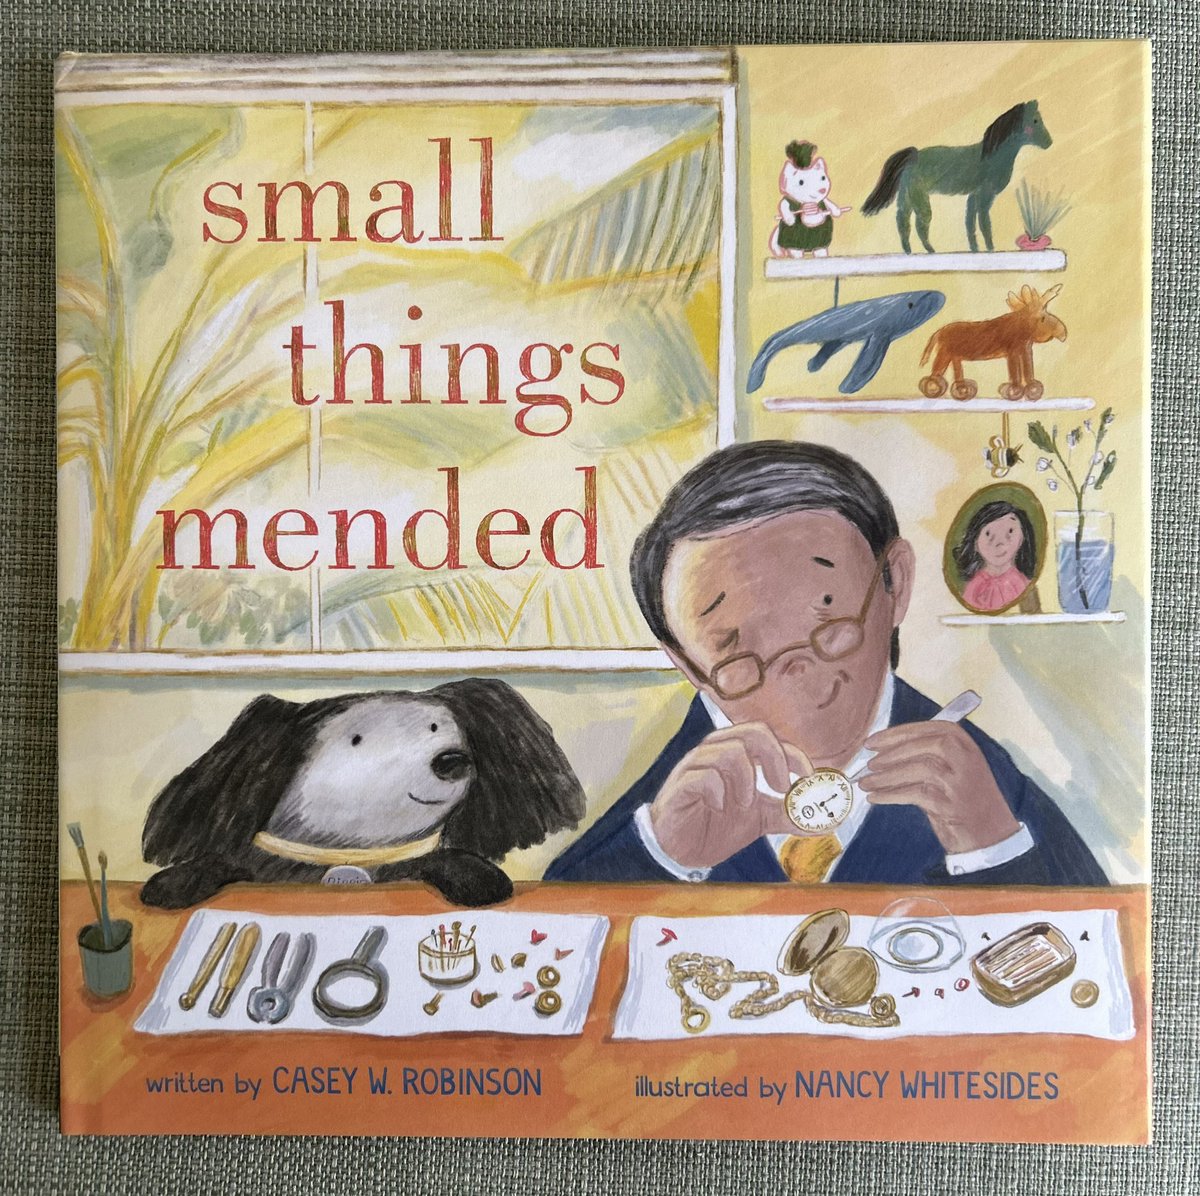 Sometimes things break, and even small things deserve a second chance. Casey W. Robinson's SMALL THINGS MENDED is a heartfelt #picturebook of kindness, community, and taking the time to make the fixes, large and small. @nancillustrator #rockypondbooks #pb #readingfortreasure